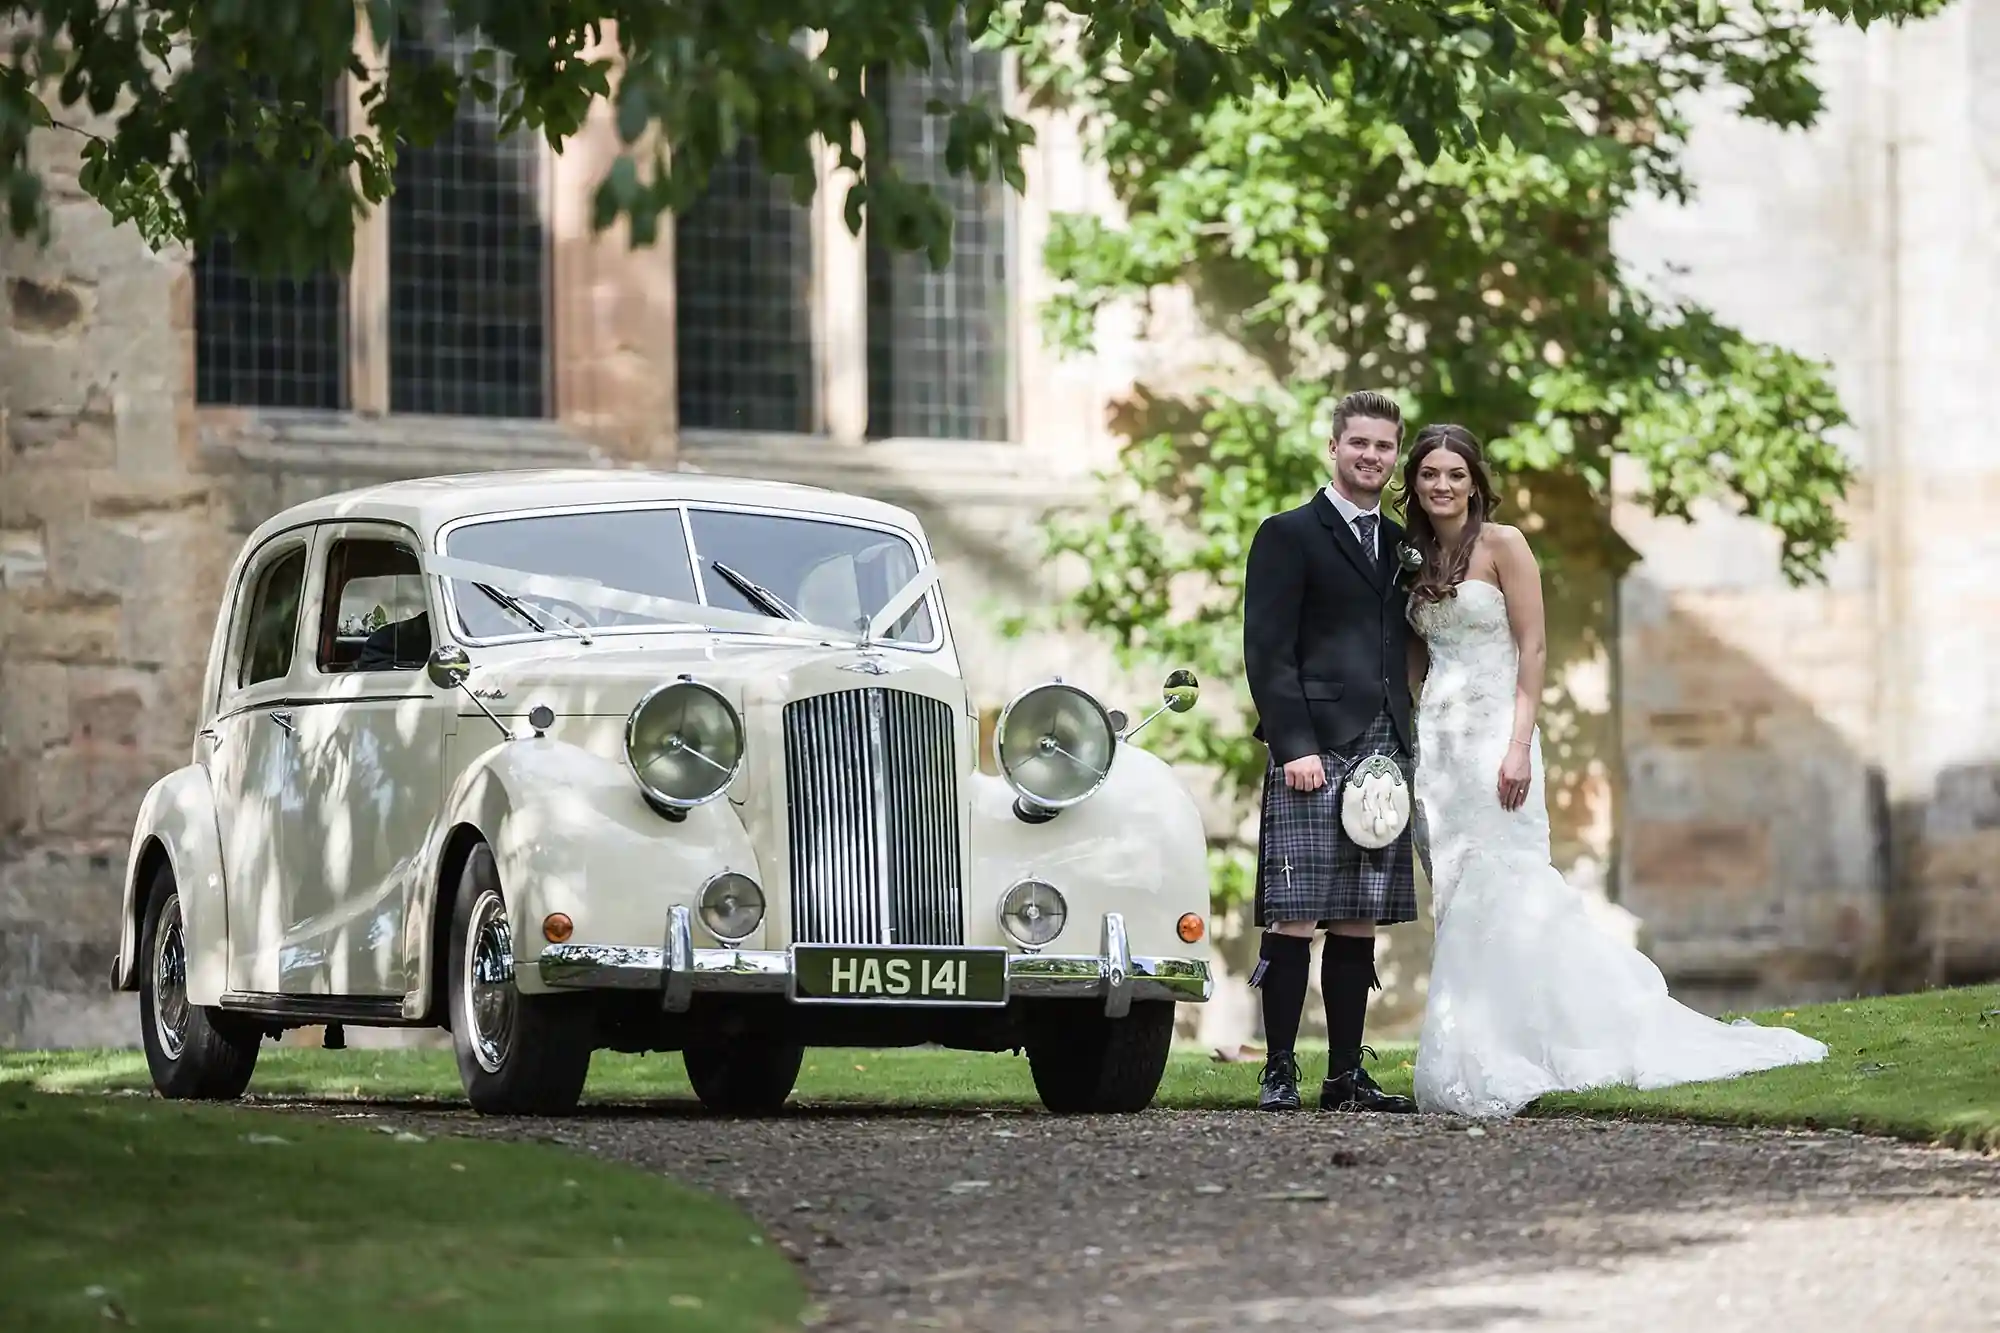 A newlywed couple stands beside a classic white vintage car, with the groom in a kilt and the bride in a long white gown, in front of a historical stone building.